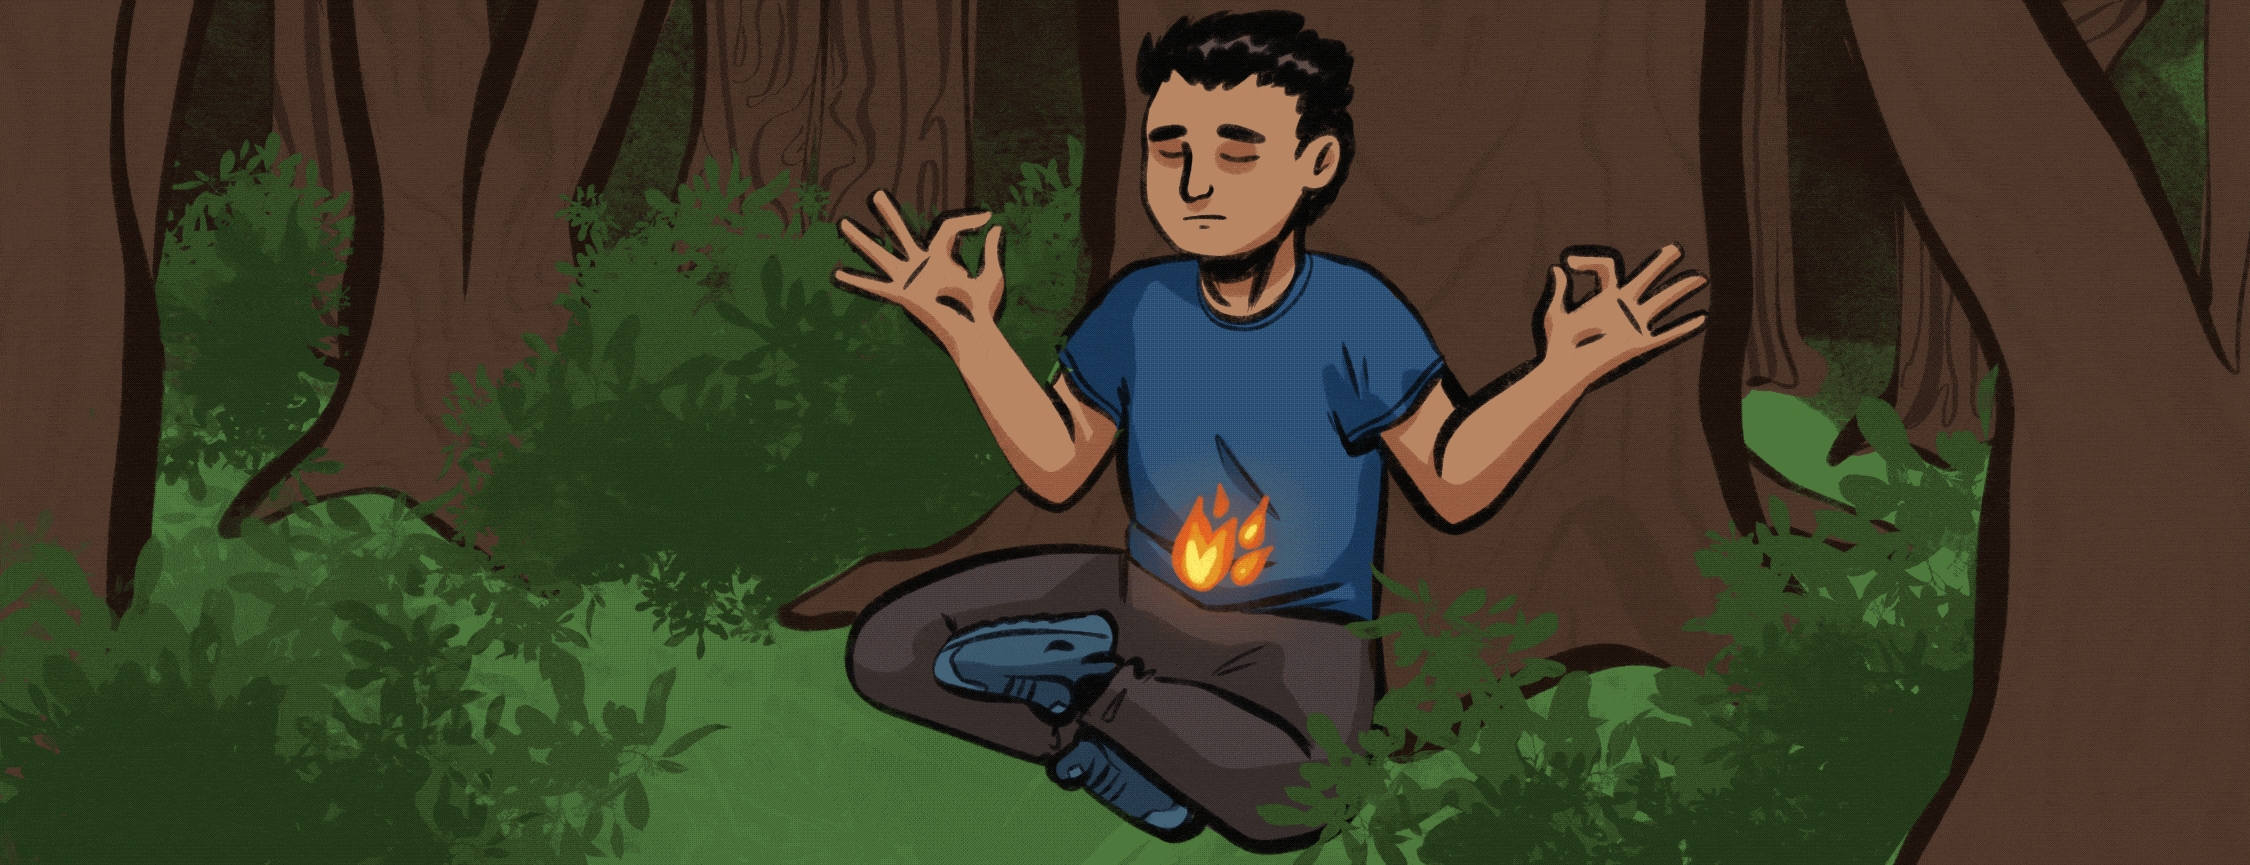 A man sits meditating in the forest, as he gets angrier the fire in his stomach grows, and as he grows calmer it shrinks. Relaxation, rage, annoyance, frustration, stomach, pain, nature, breathing